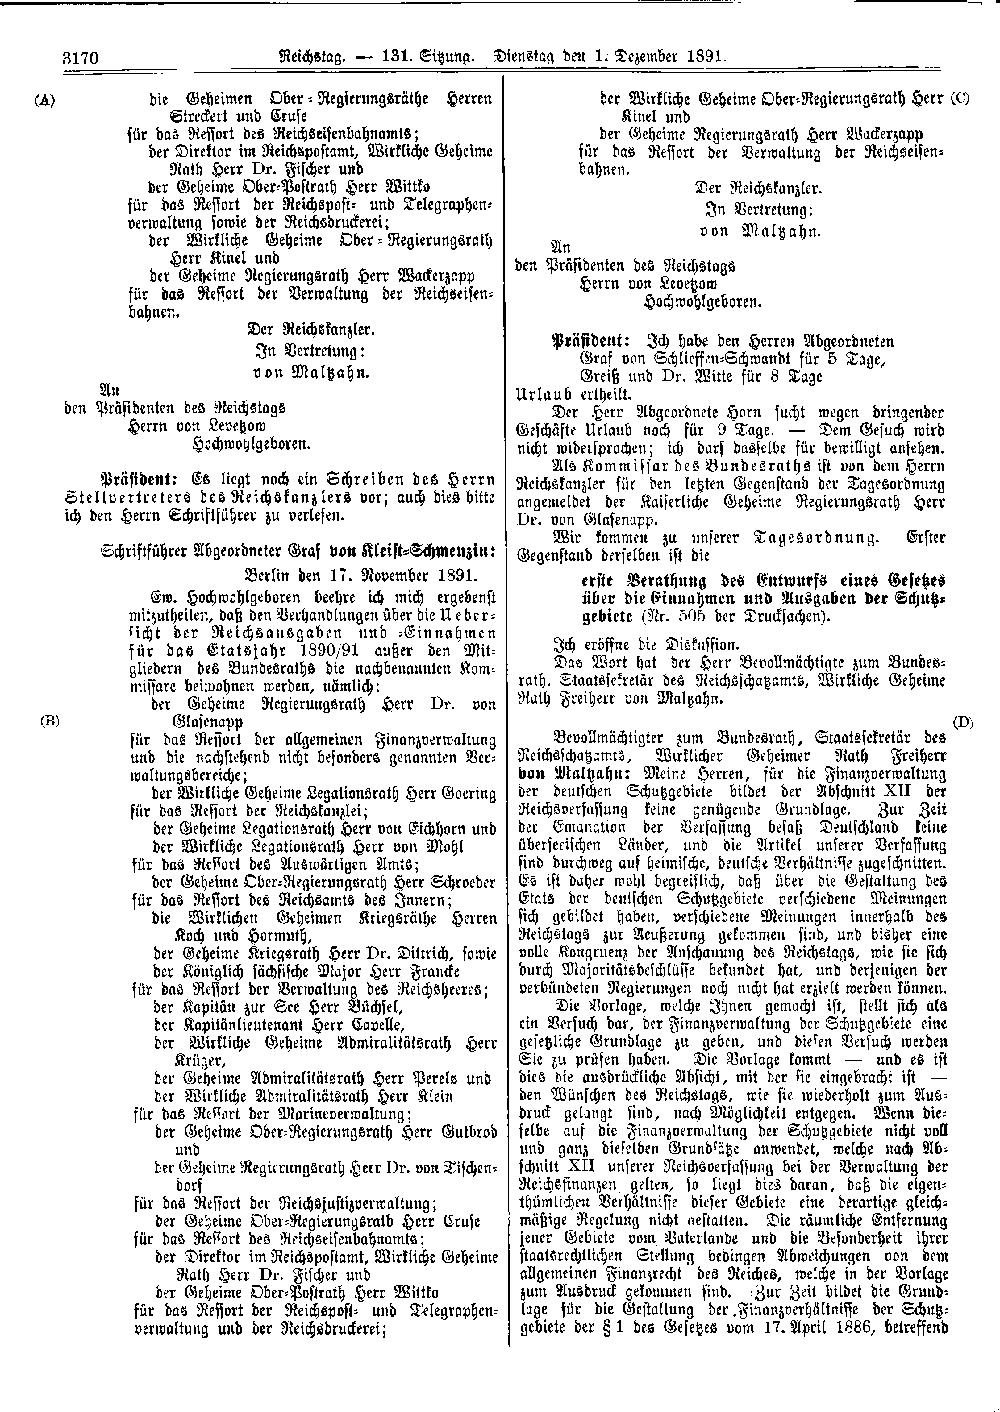 Scan of page 3170